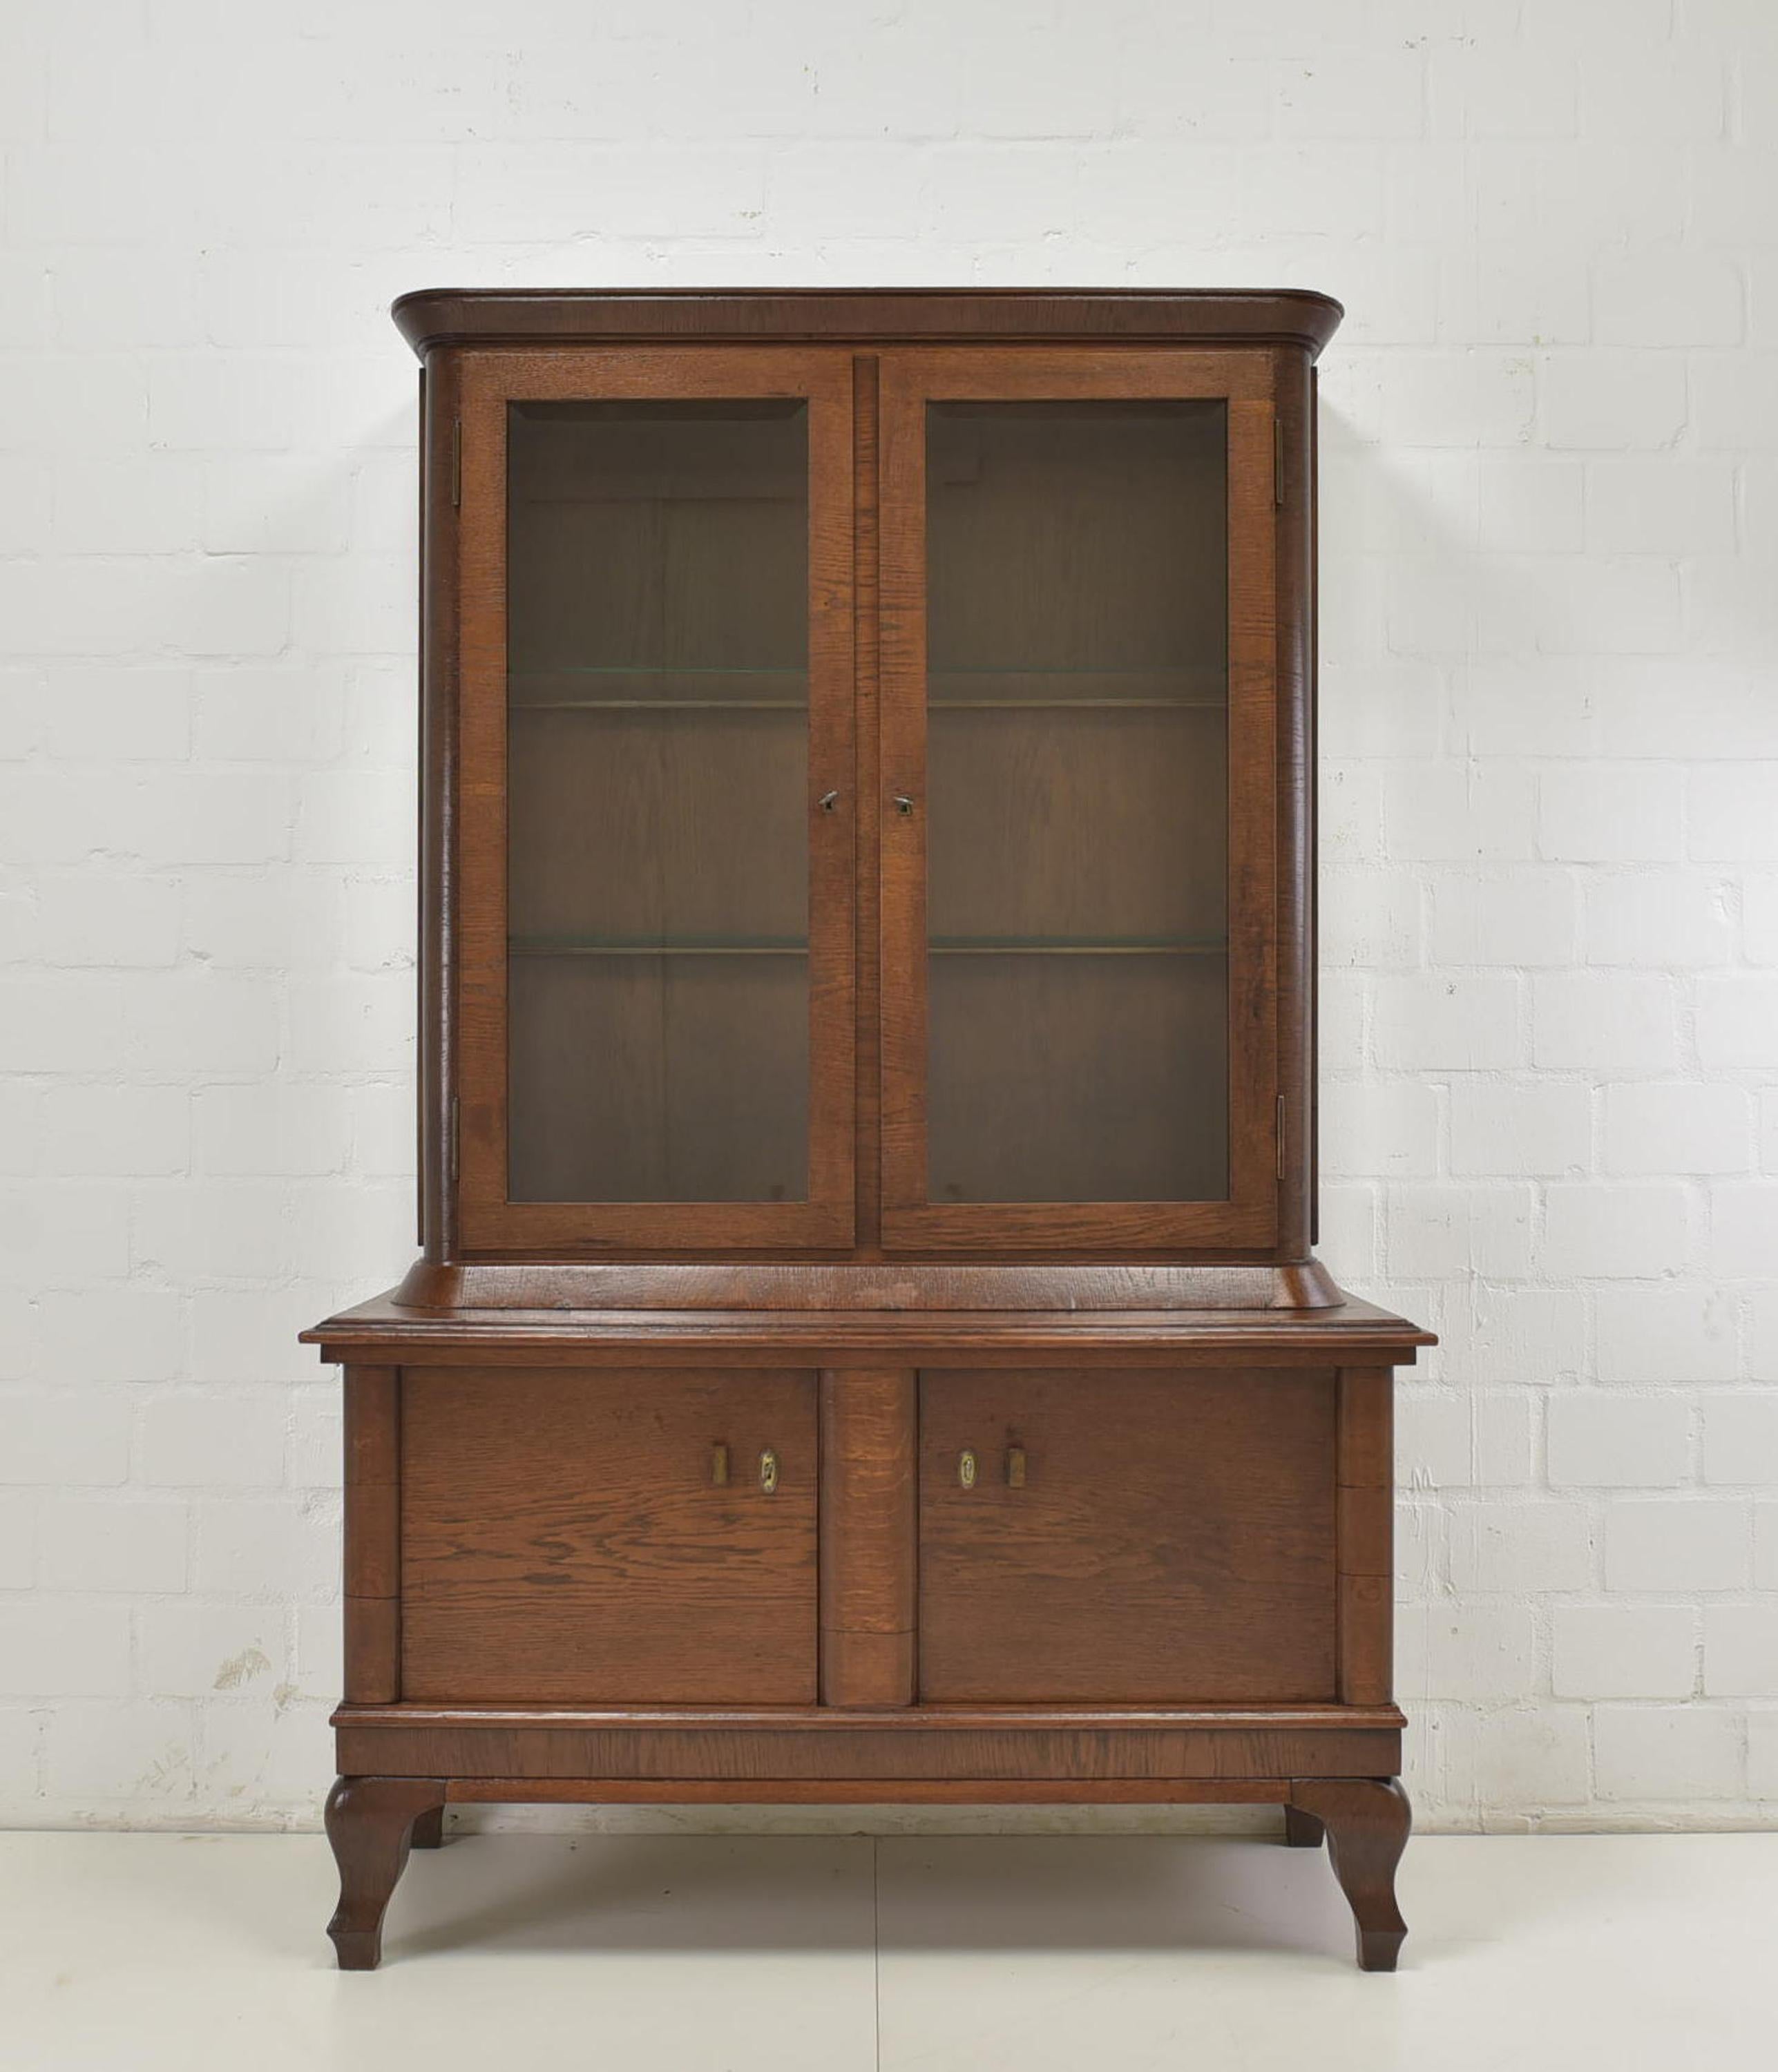 Showcase restored Art Deco around 1930 oak showcase

Features:
Three-sided glazed display case on two-door base
Original glazing with facet cut
Beautiful patina
The cabinet is in two parts (upper / lower part)

Additional